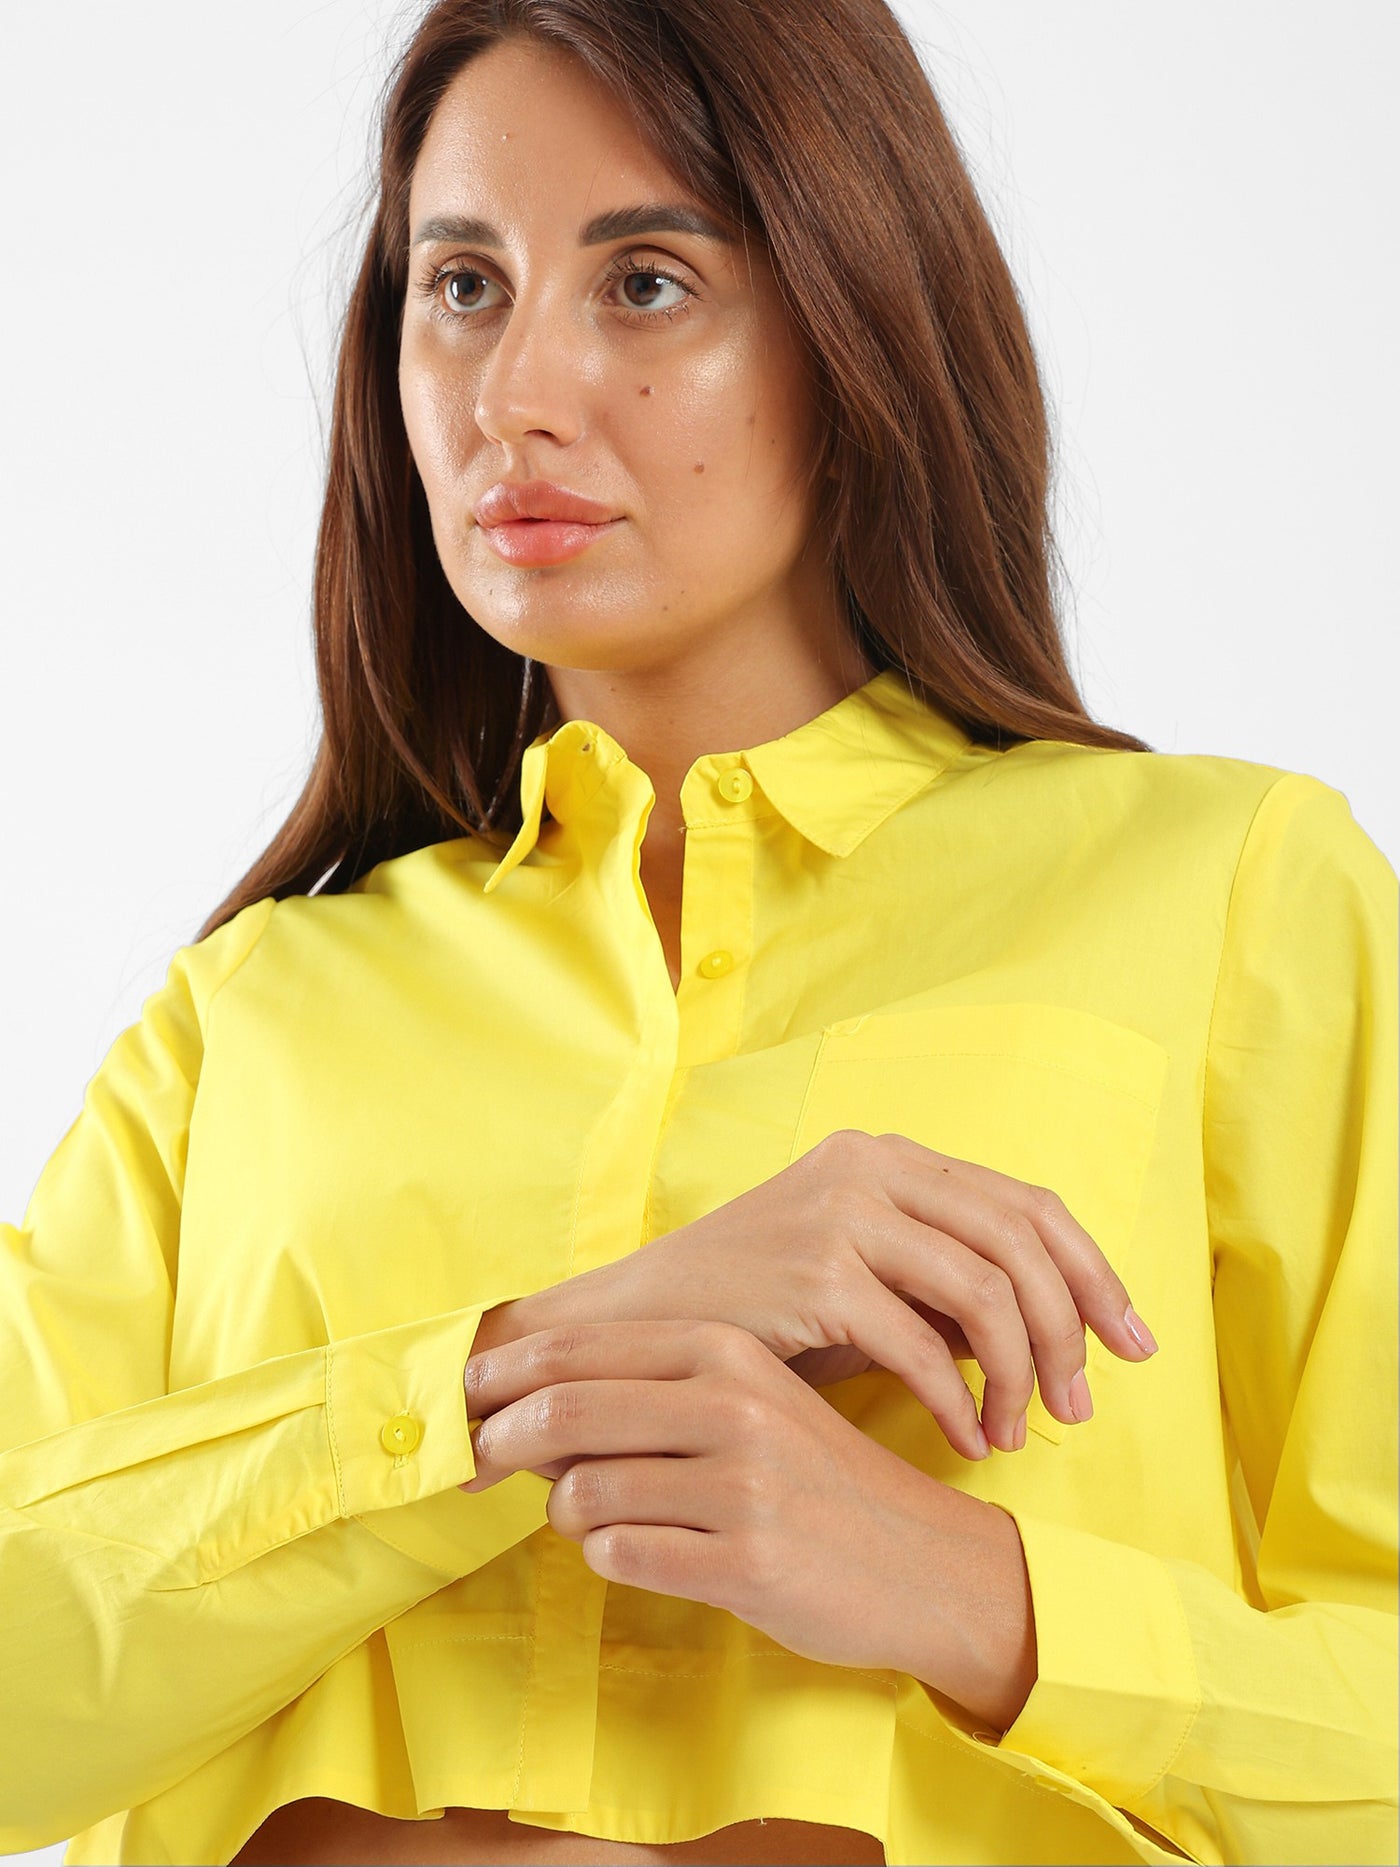 Shirt - High-Low - With Front Pocket